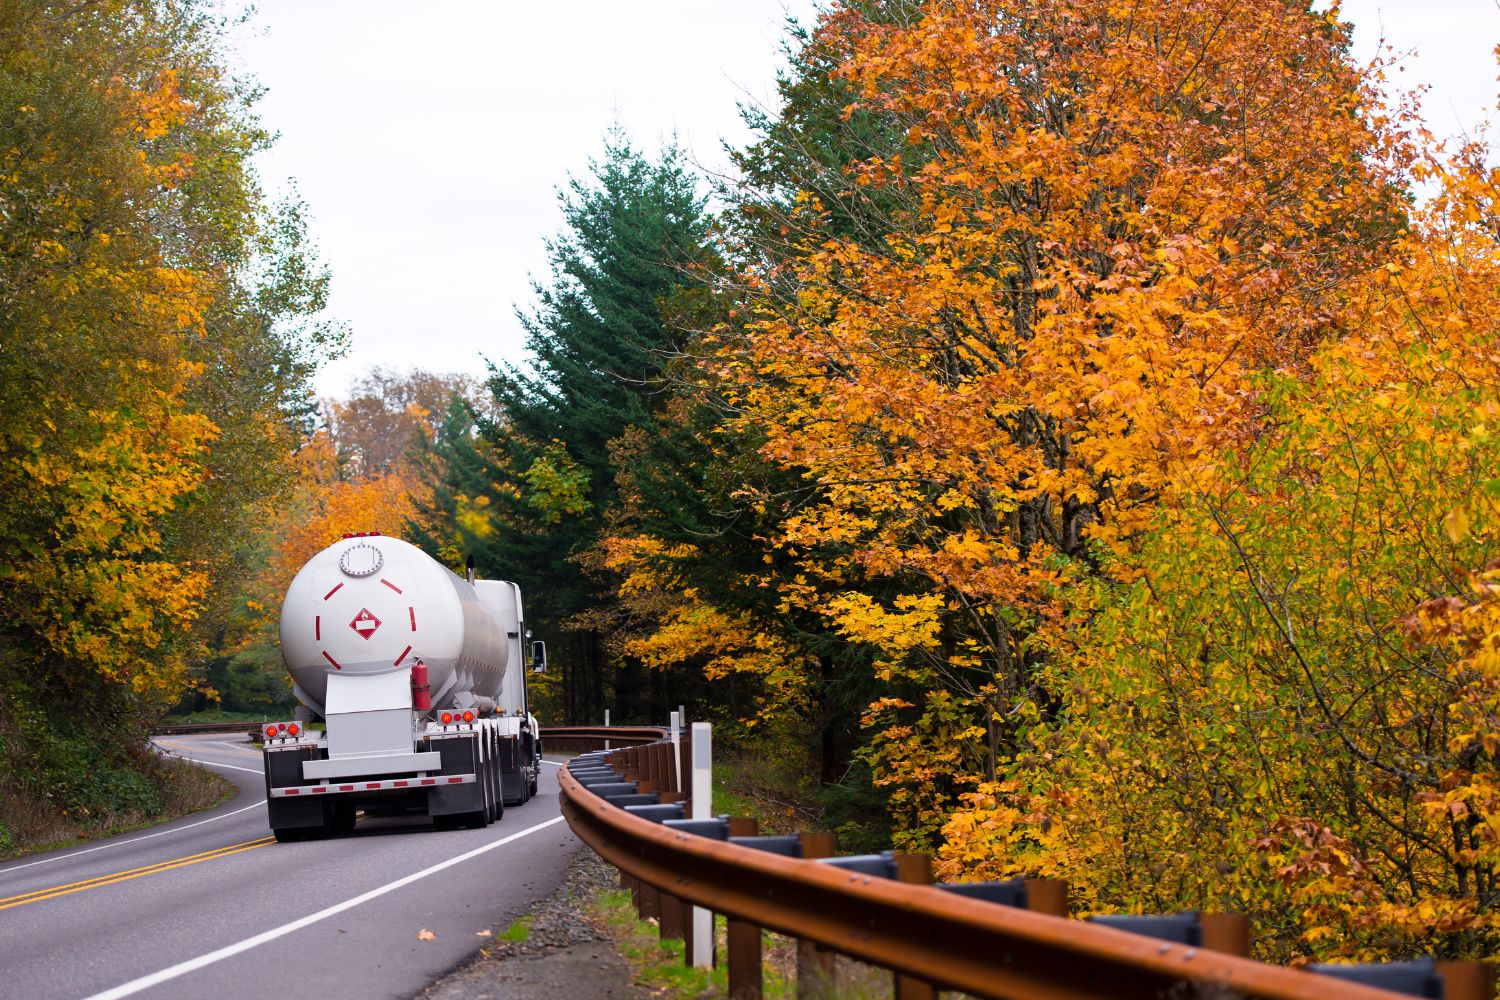 Image of a Tanker Truck Driving Down a Road during Autumn